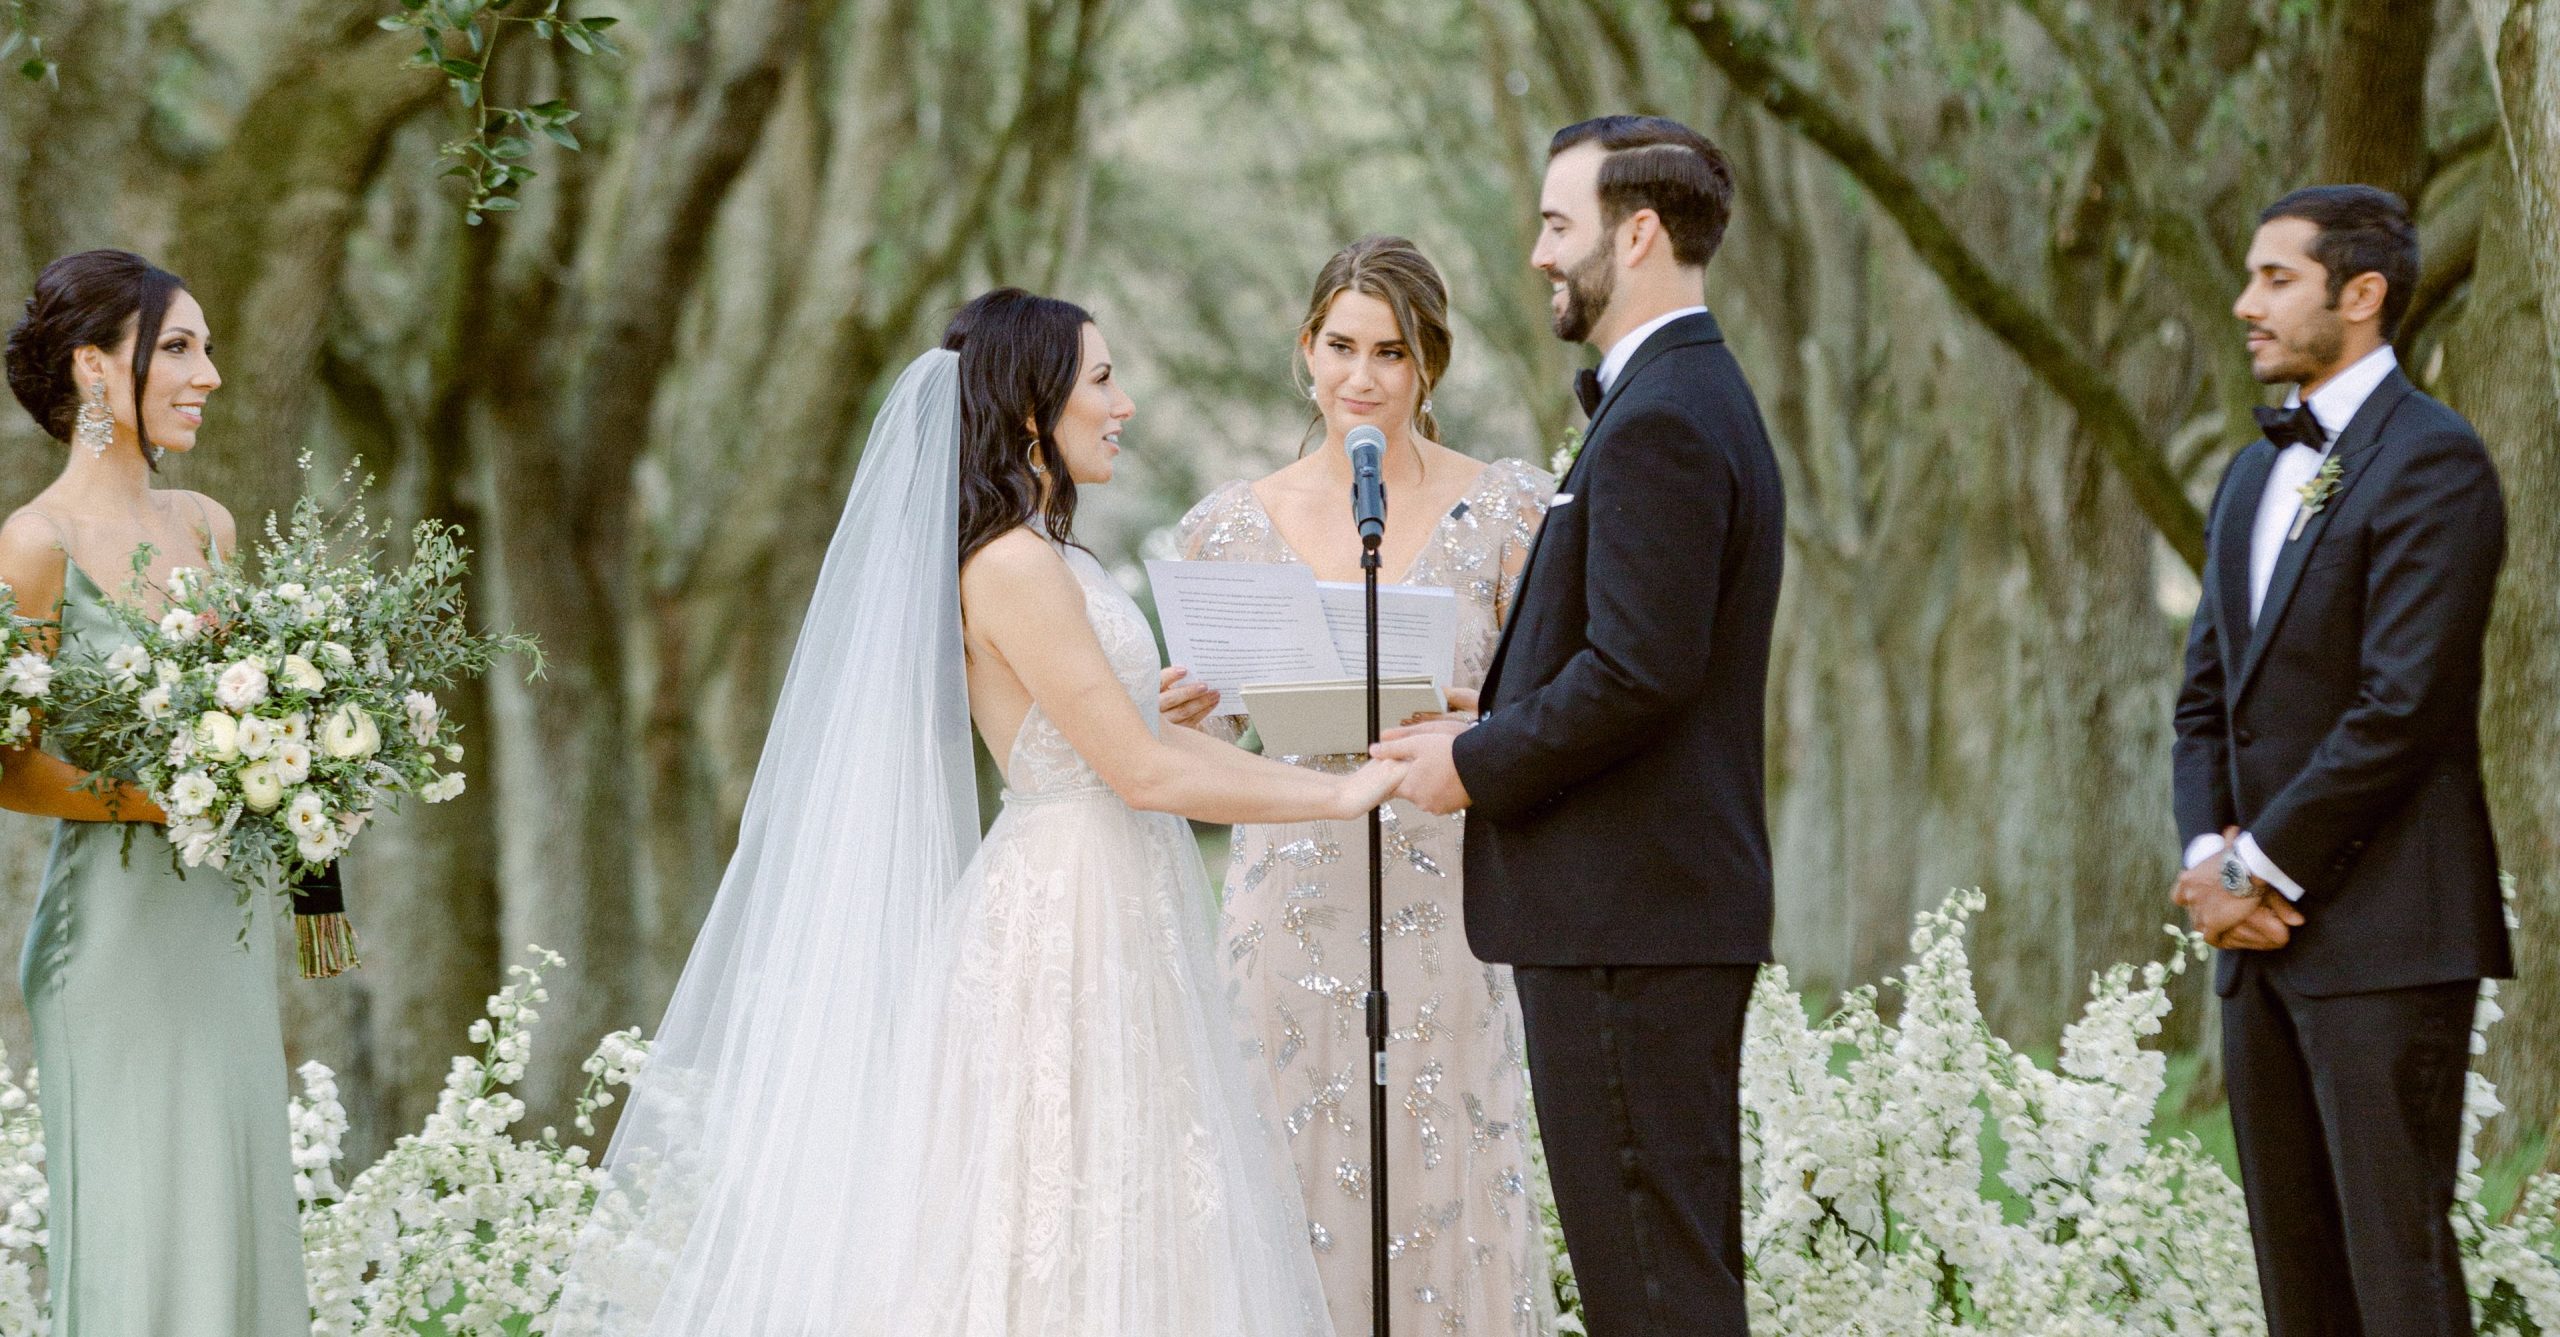 How to Officiate a Wedding Ceremony